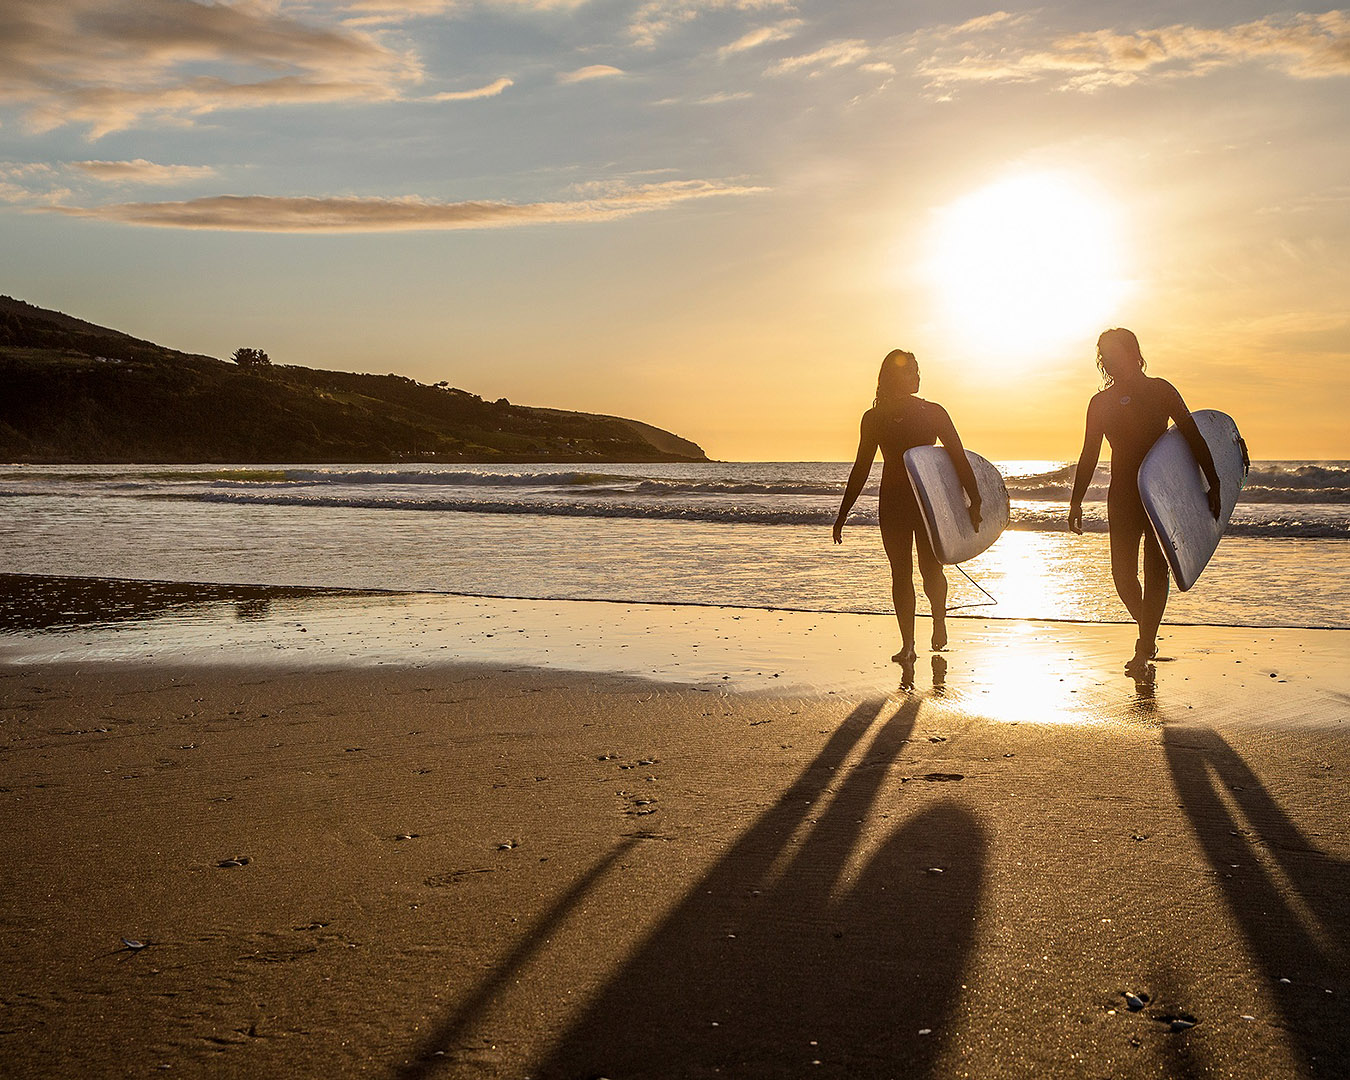 Two people with their surfboards on Ngarunui Beach.